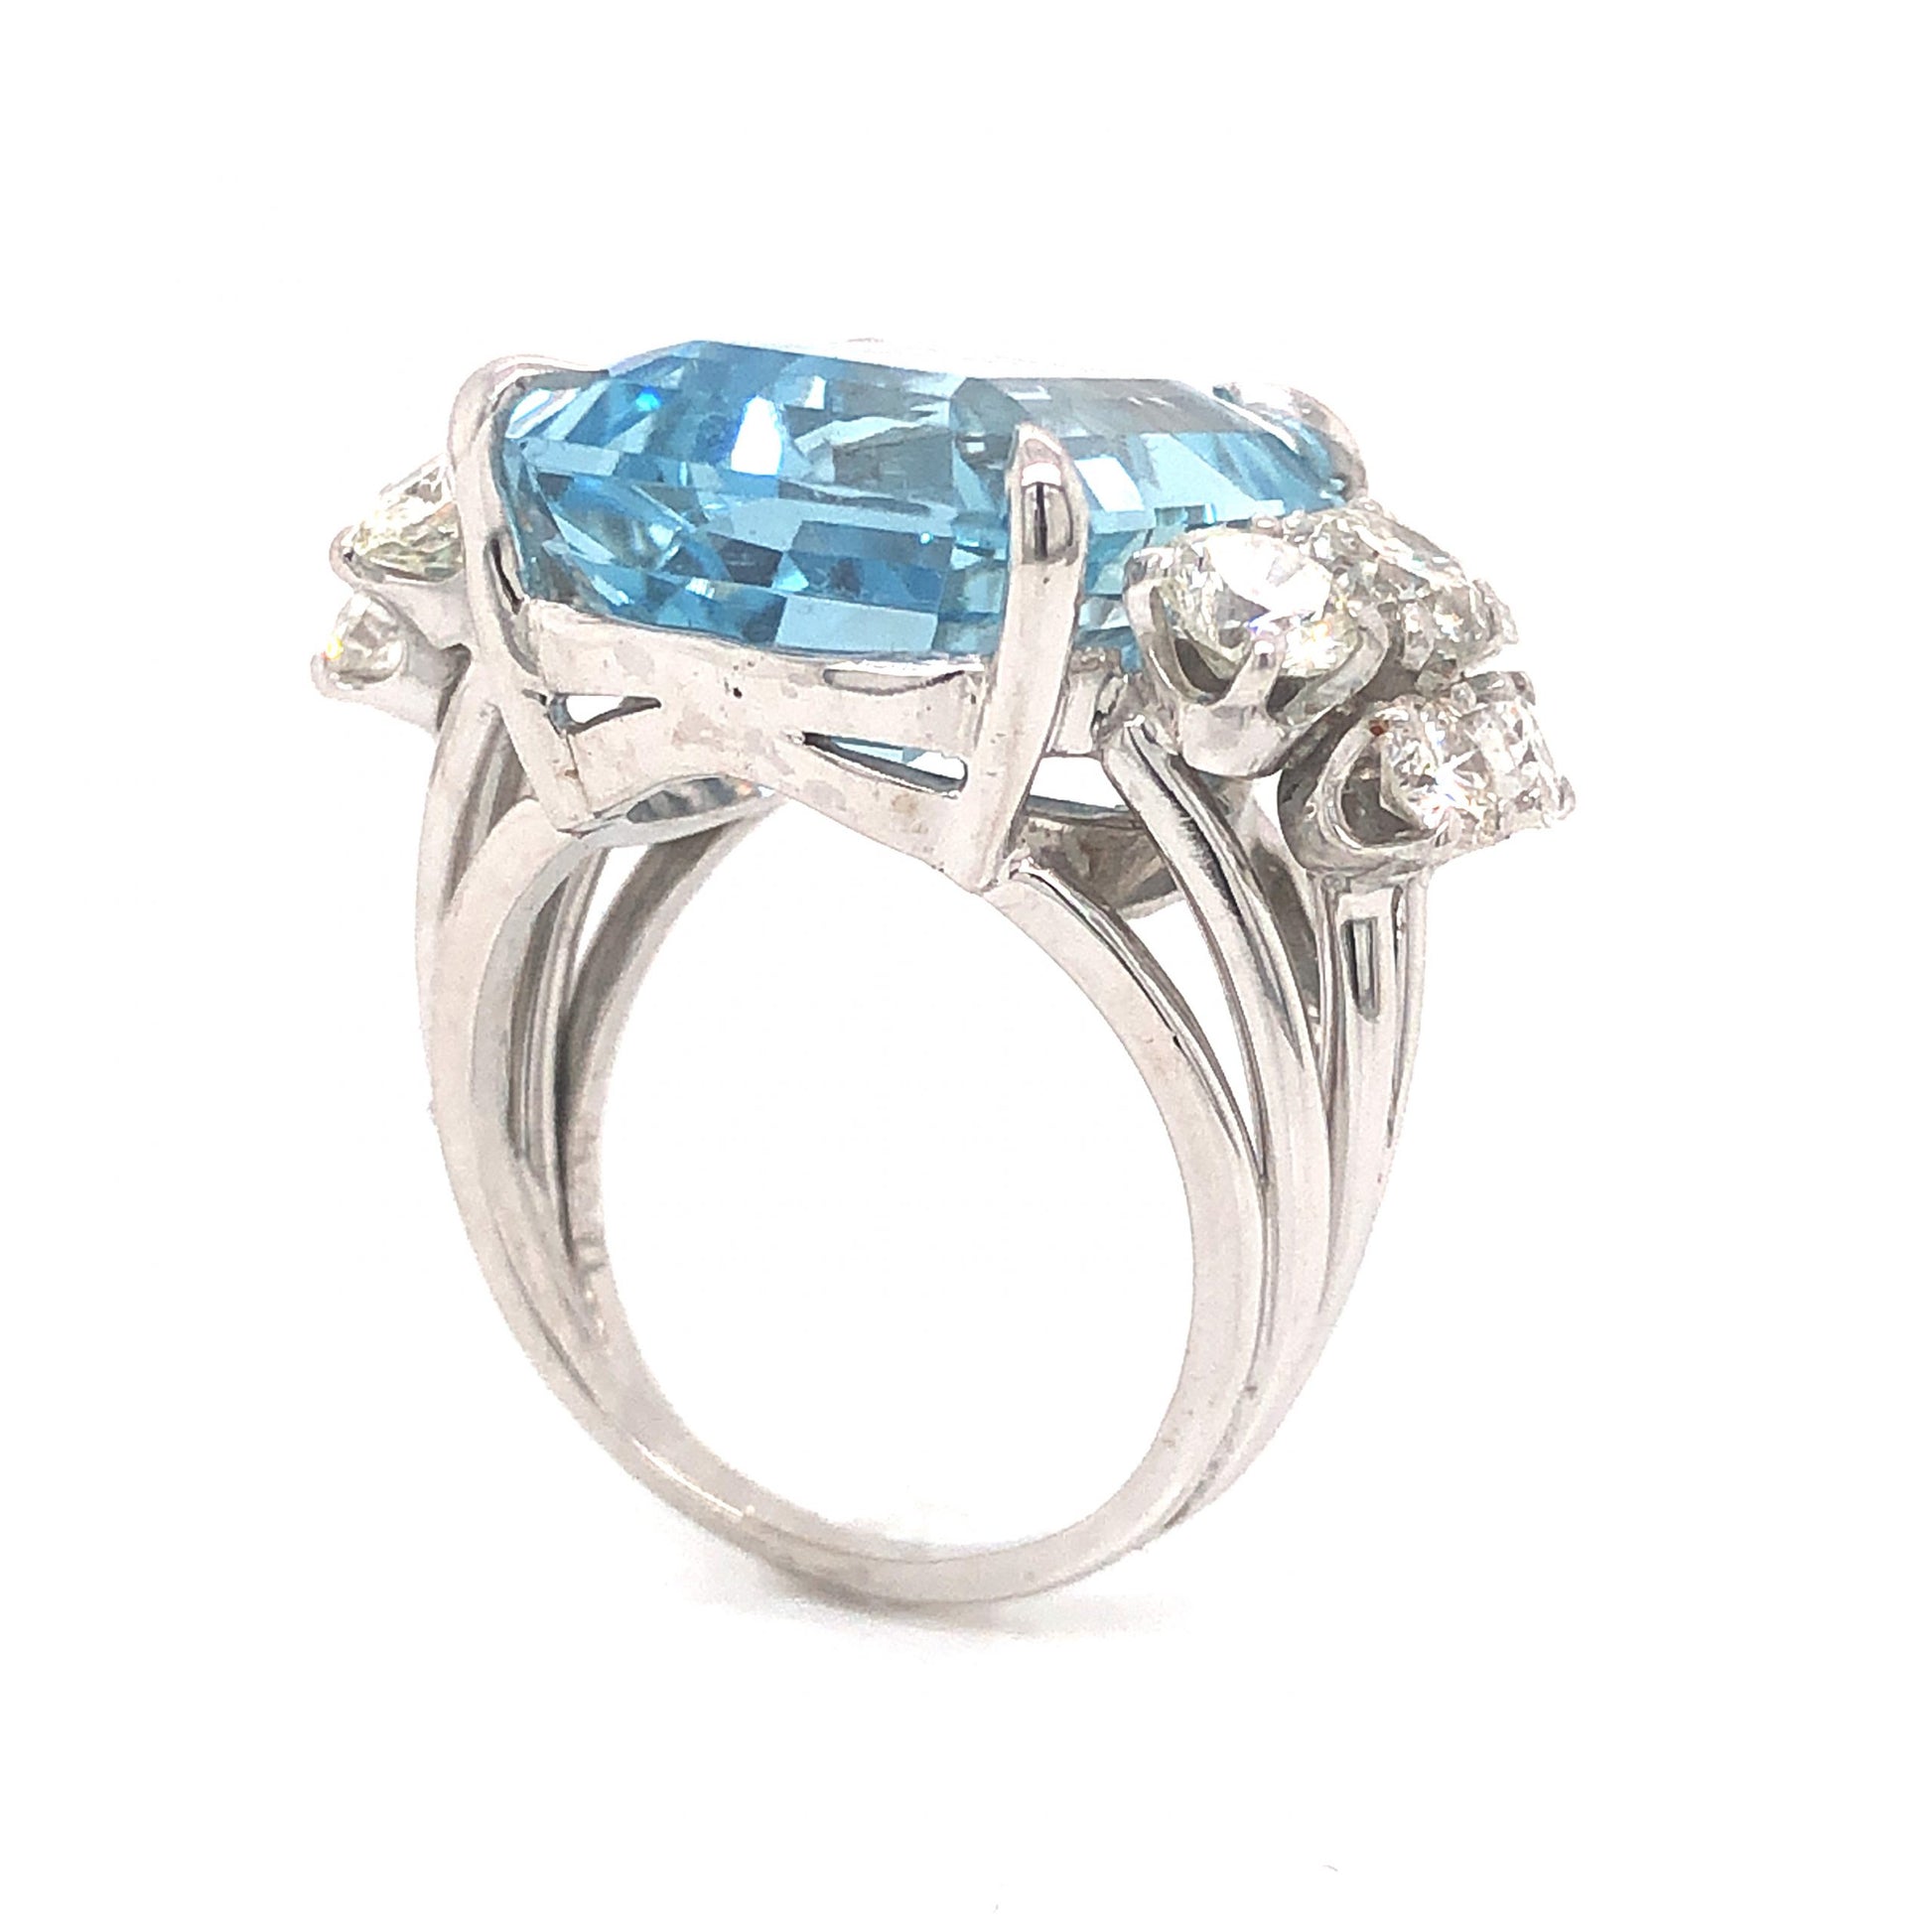 1950's Aquamarine & Diamond Cocktail Ring in PlatinumComposition: Platinum Ring Size: 6.25 Total Diamond Weight: 2.84ct Total Gram Weight: 10.8 g Inscription: PLAT
      